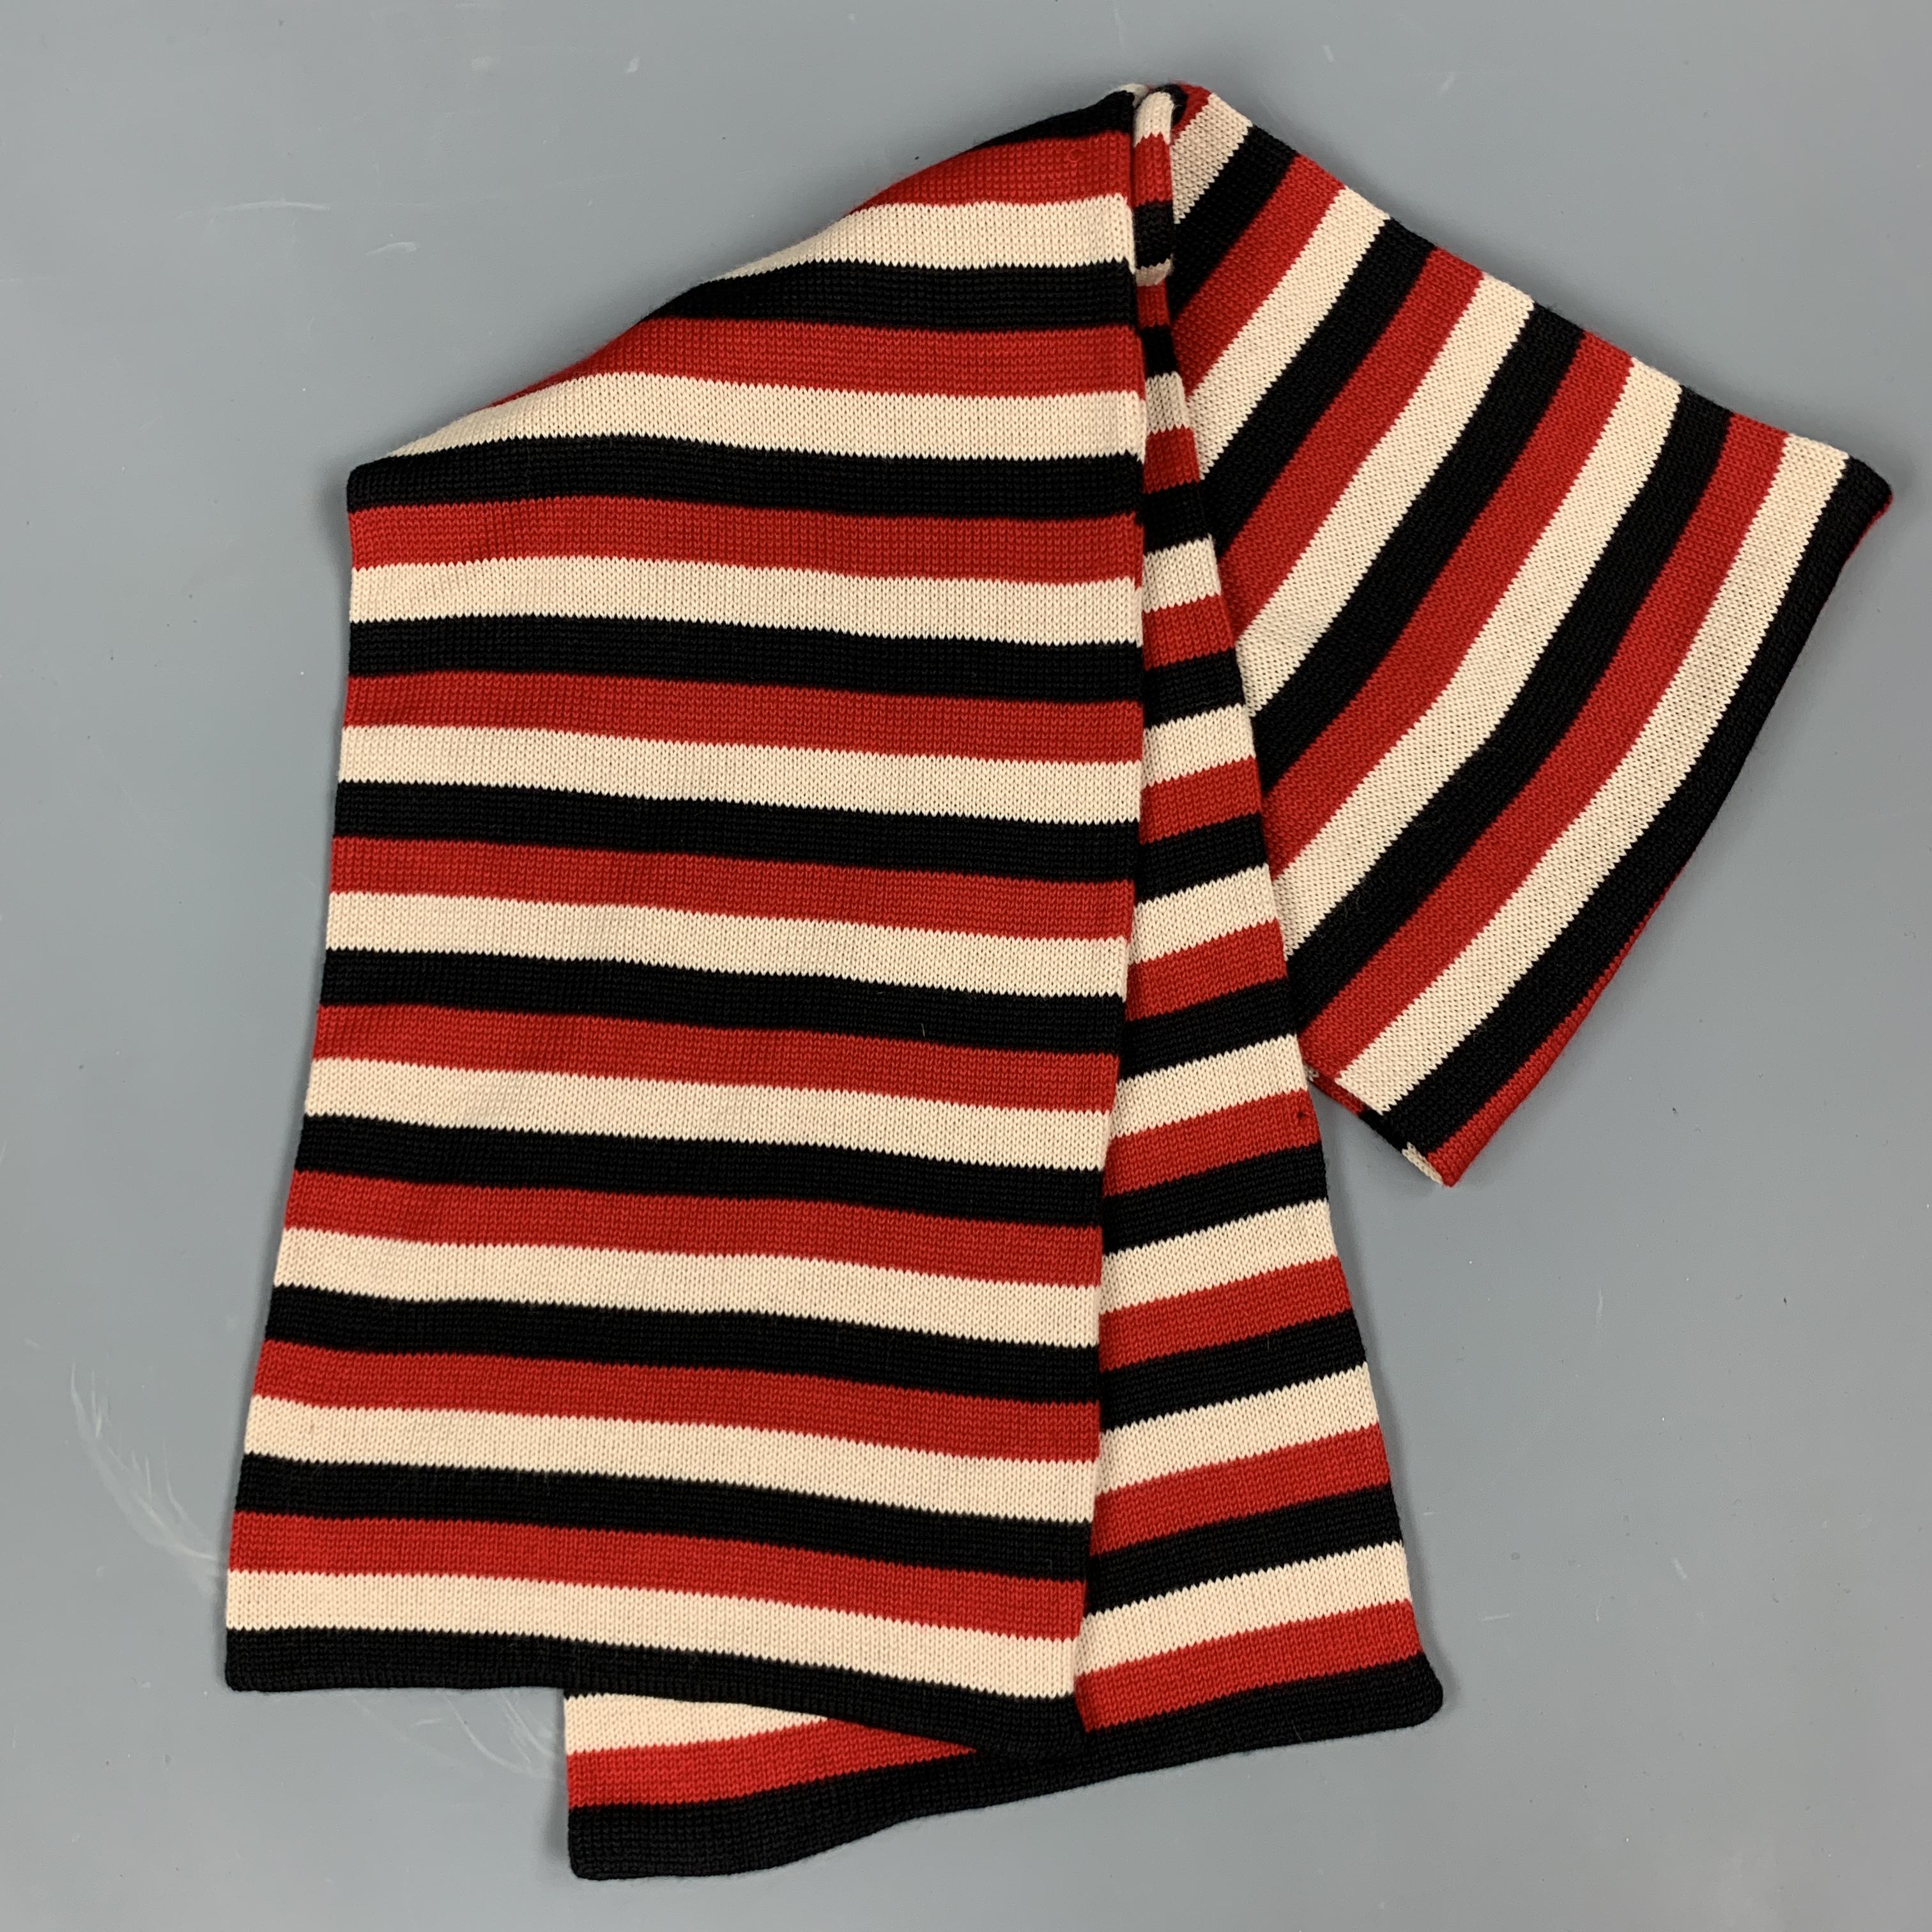 YOHJI YAMAMOTO POUR HOMME scarf comes in red, beige, and black striped wool knit in a long rectangular shape. Made in Japan.

Excellent Pre-Owned Condition.

76 x 12 in.